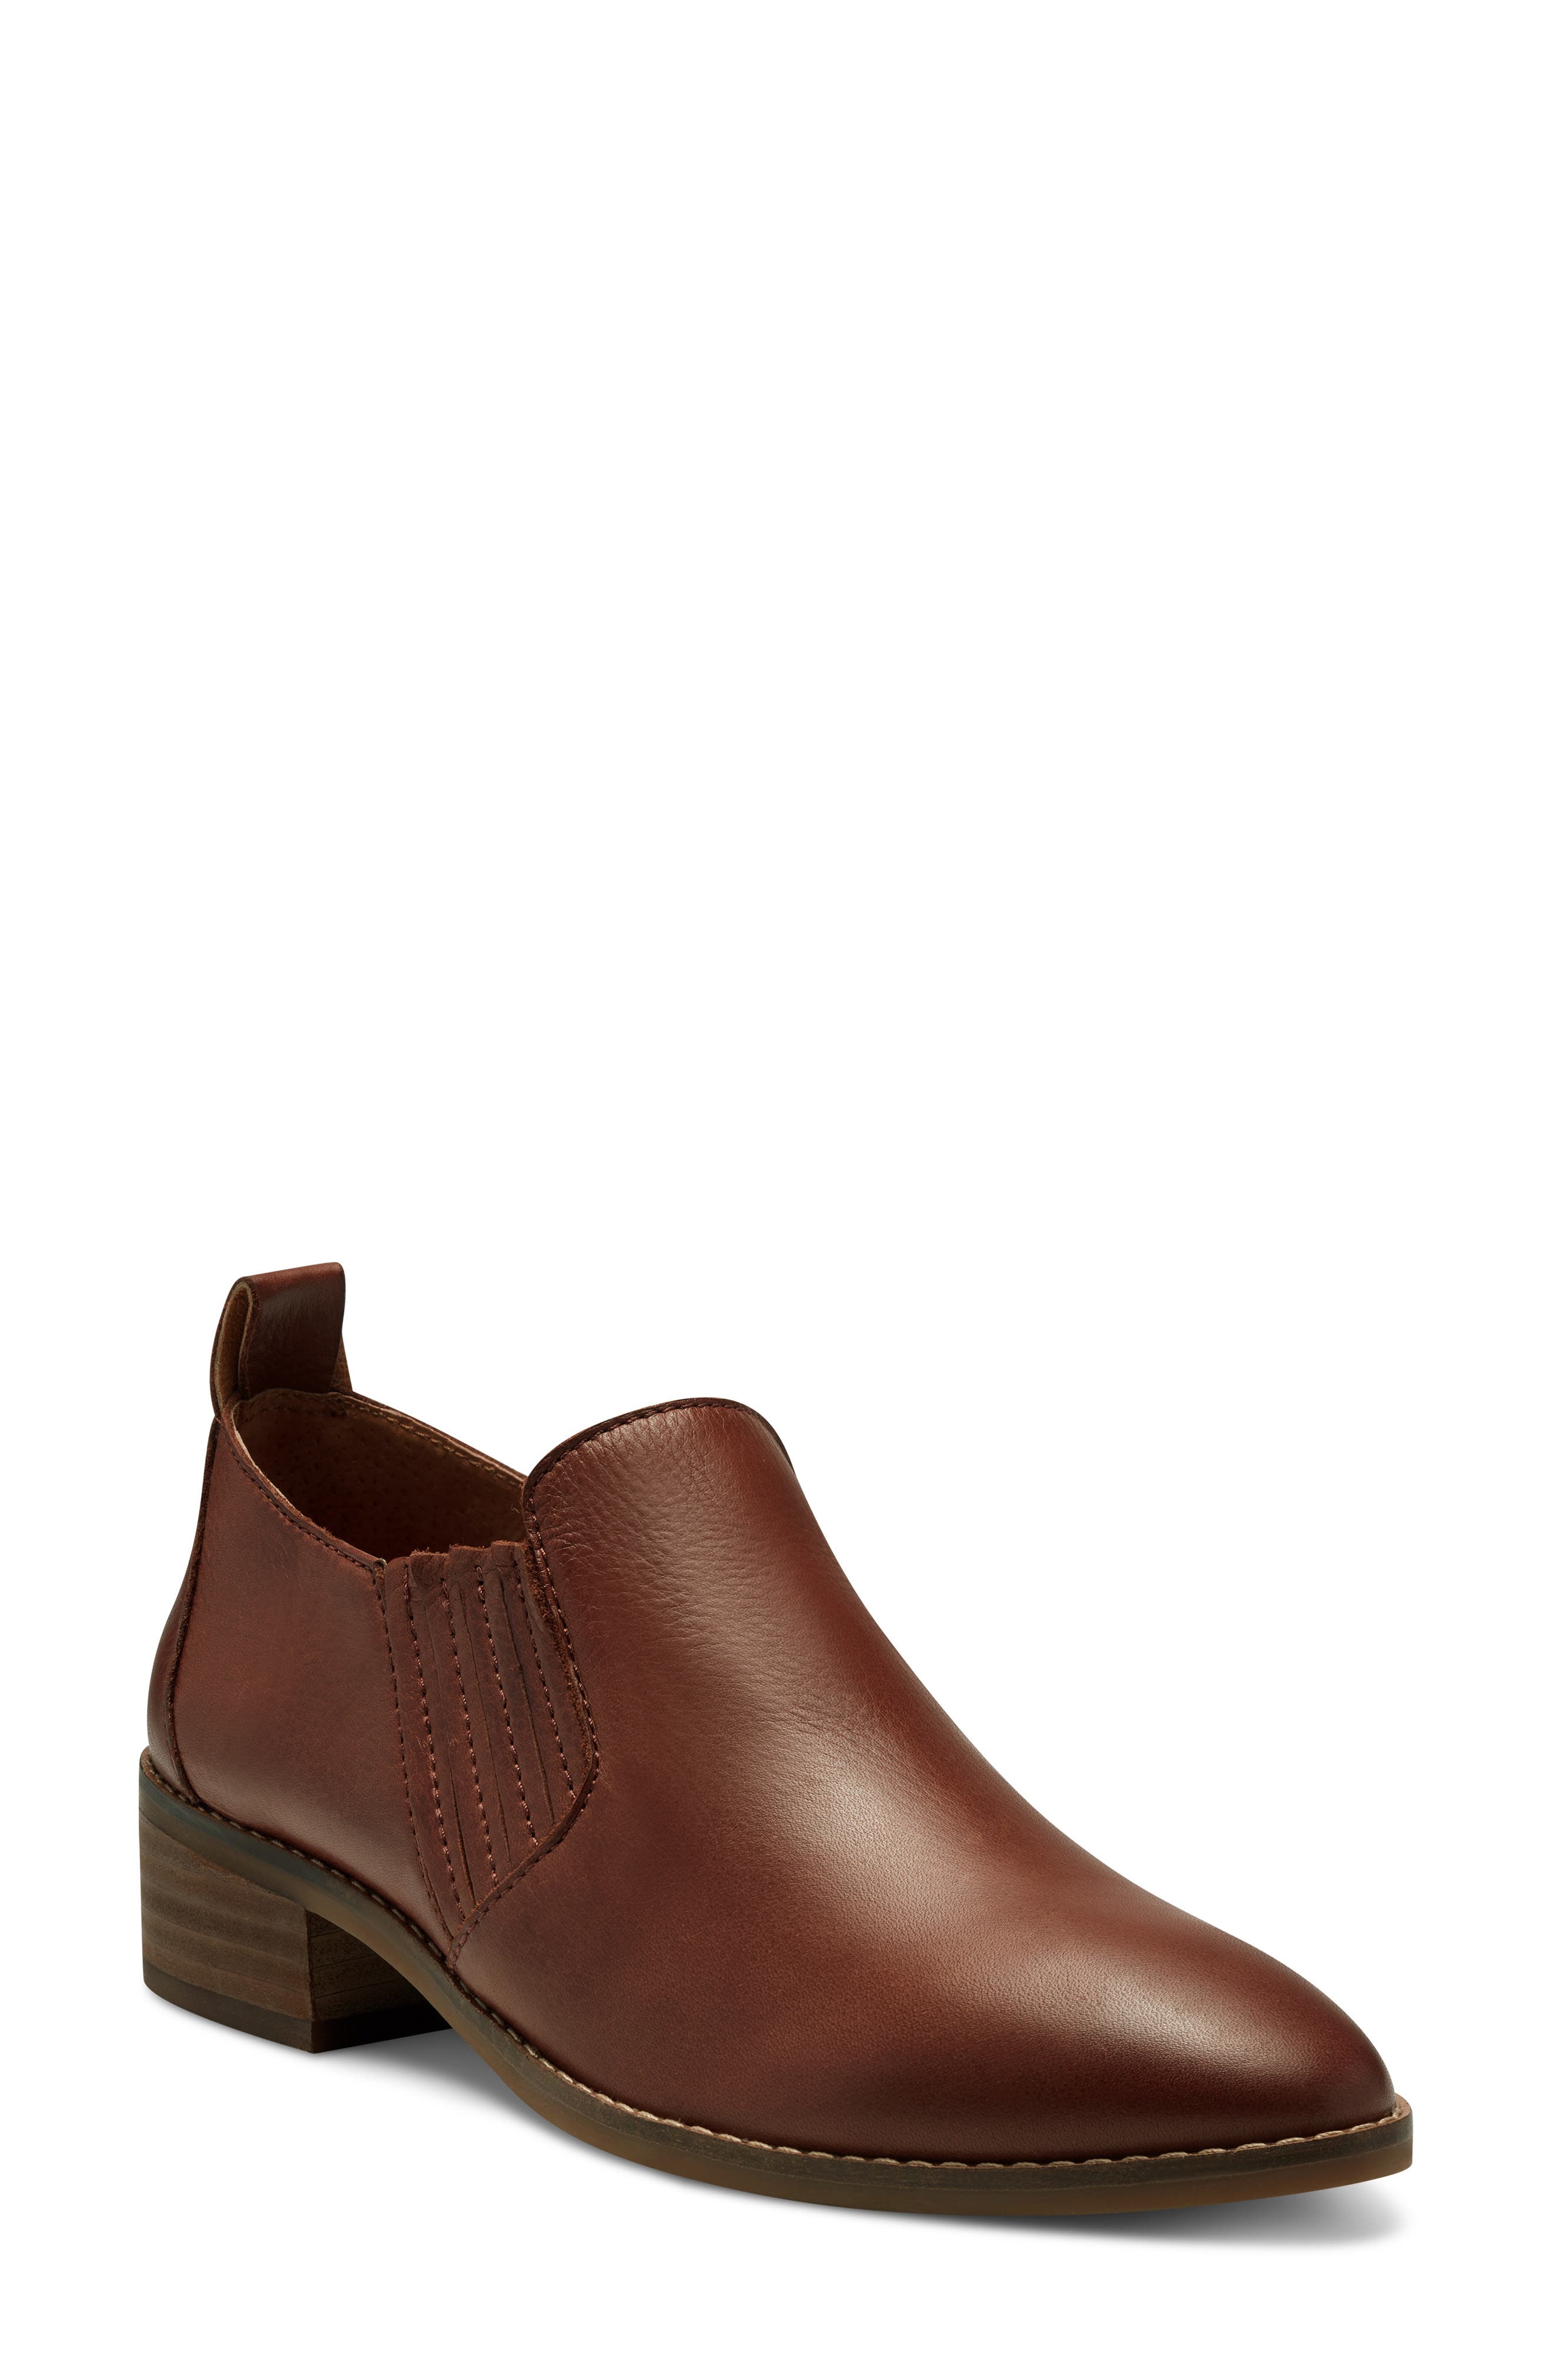 lucky brand garbohh bootie